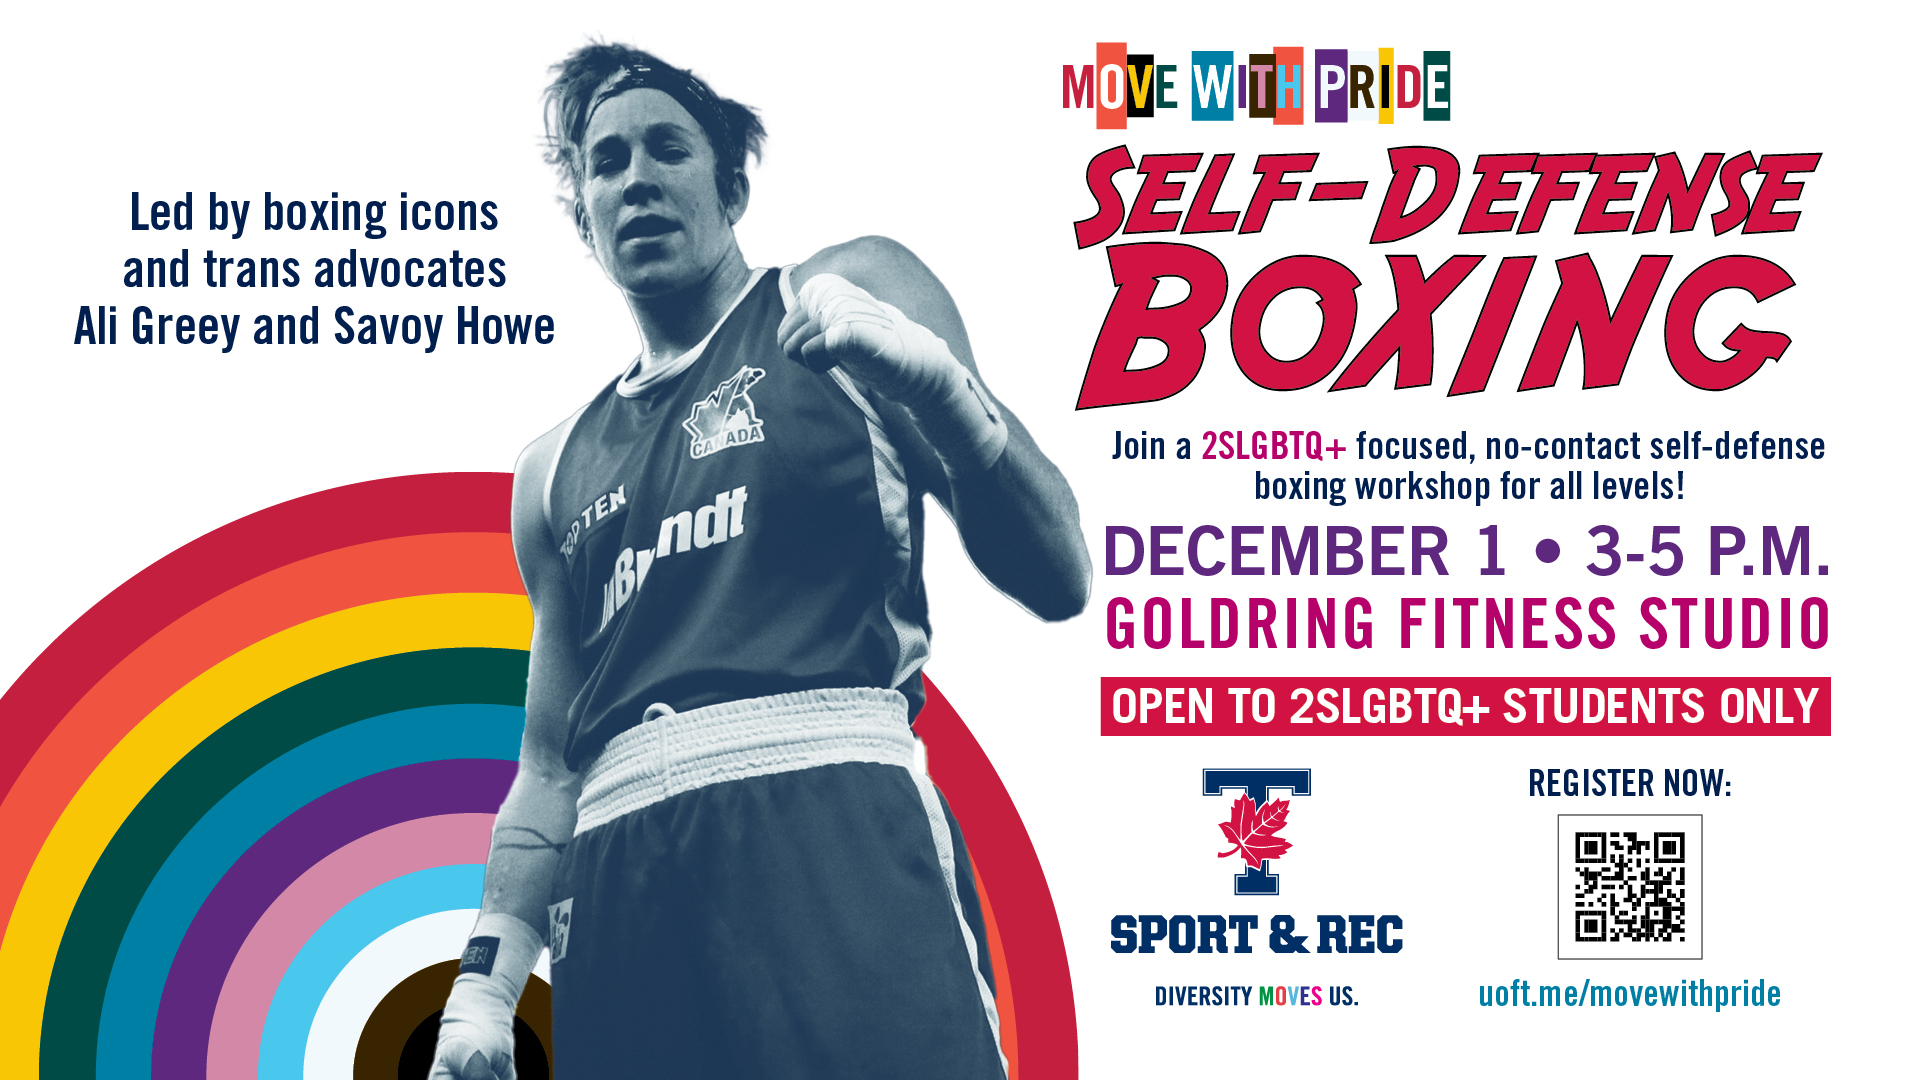 A trans sports athlete overlaps with a rainbow. Join a SLGBTQ+ self-defense boxing workout on December 1 from 3-5 pm, led by trans advocates Ali Greey and Savoy Howe.